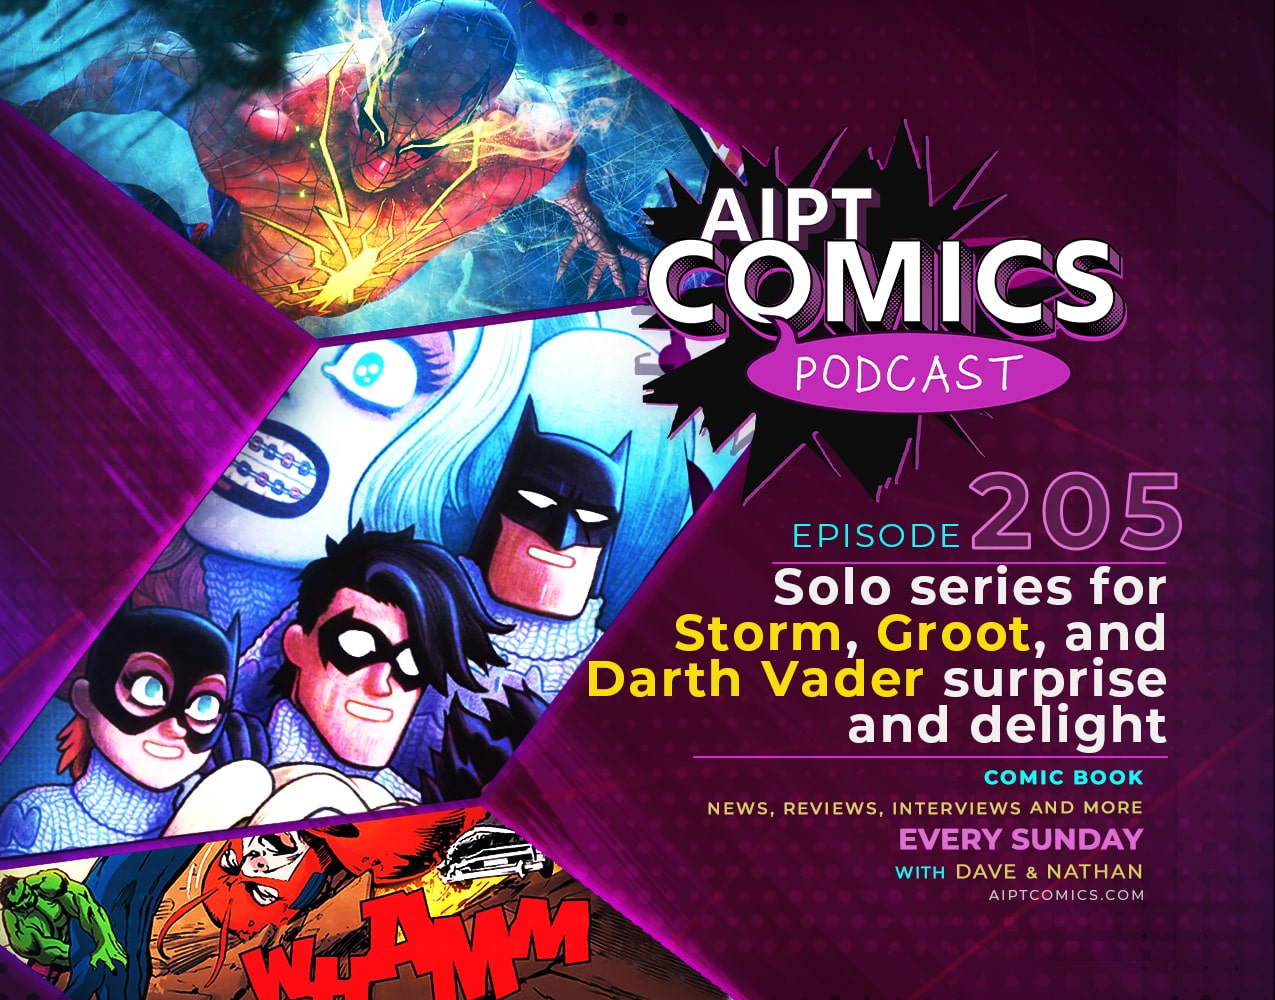 AIPT Comics Podcast episode 205: Solo series for Storm, Groot, and Darth Vader surprise and delight